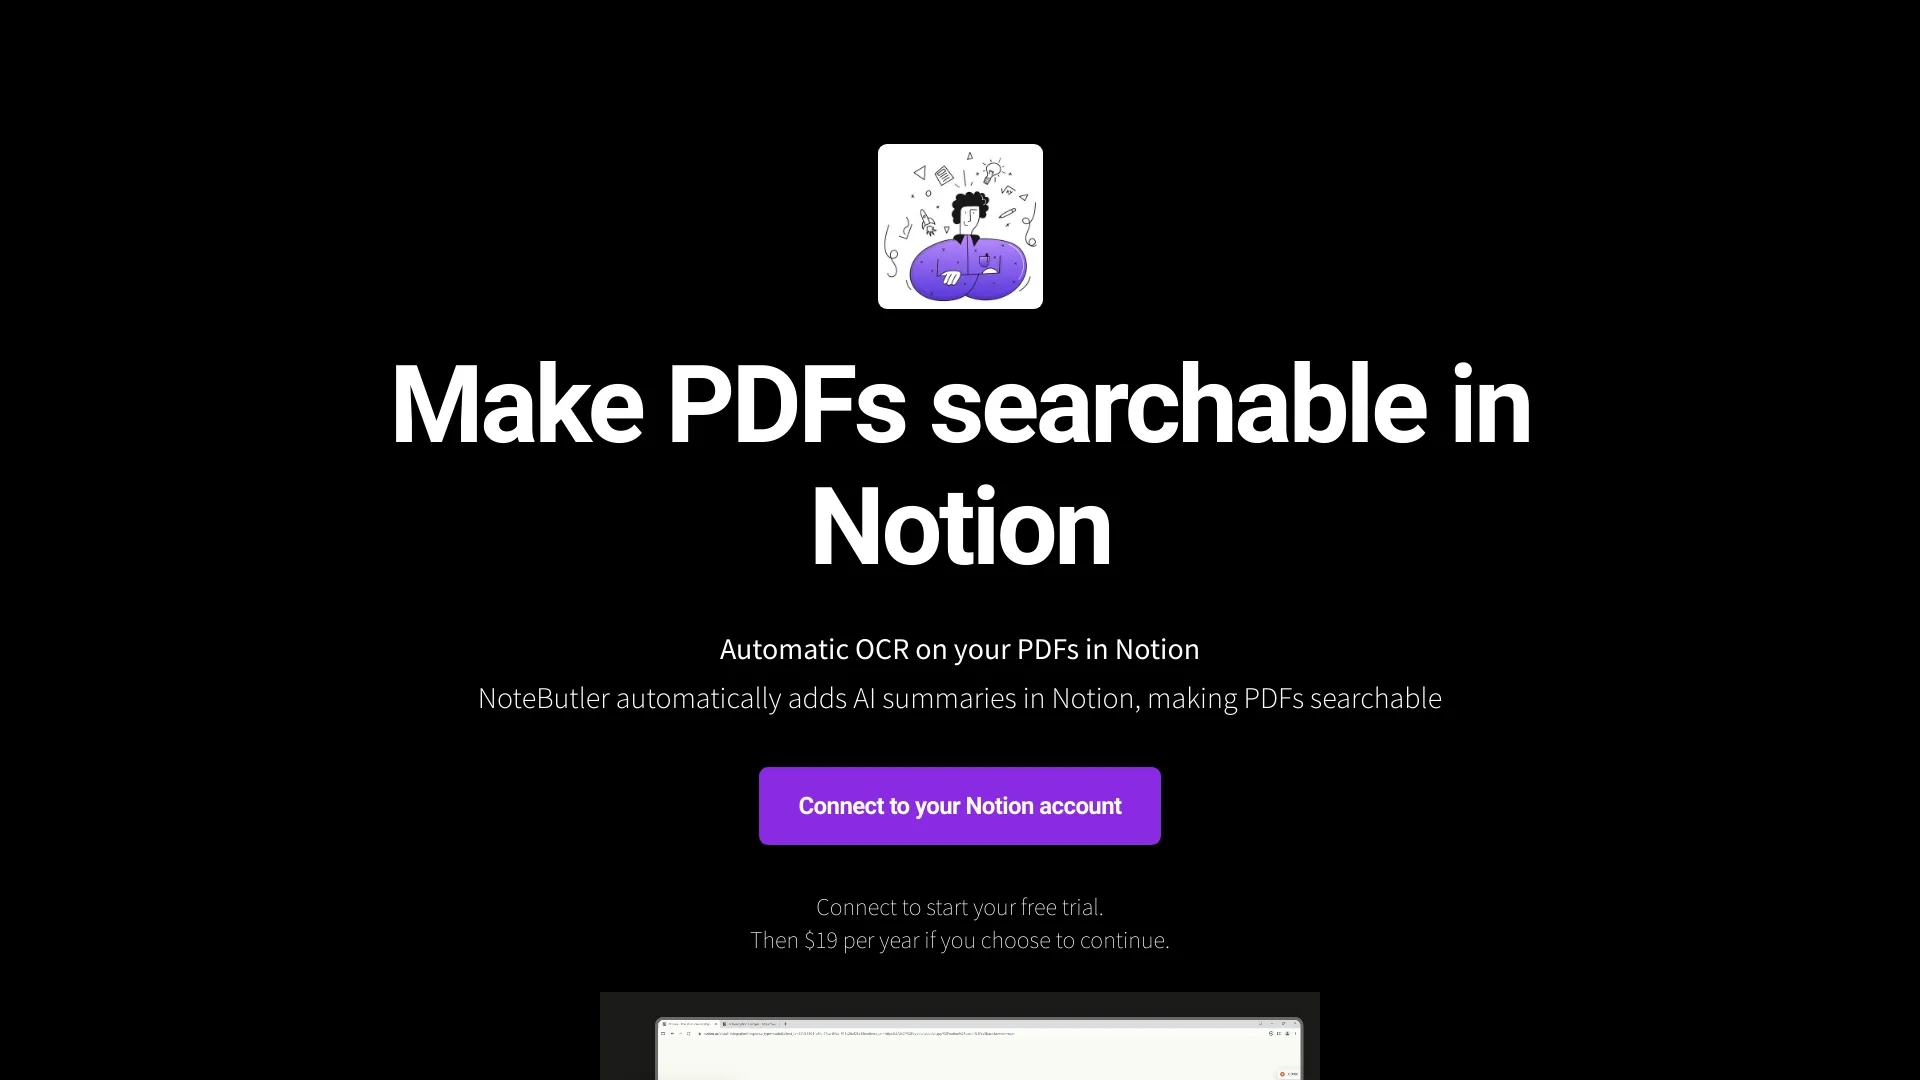 NoteButler - searchable PDFs in Notion